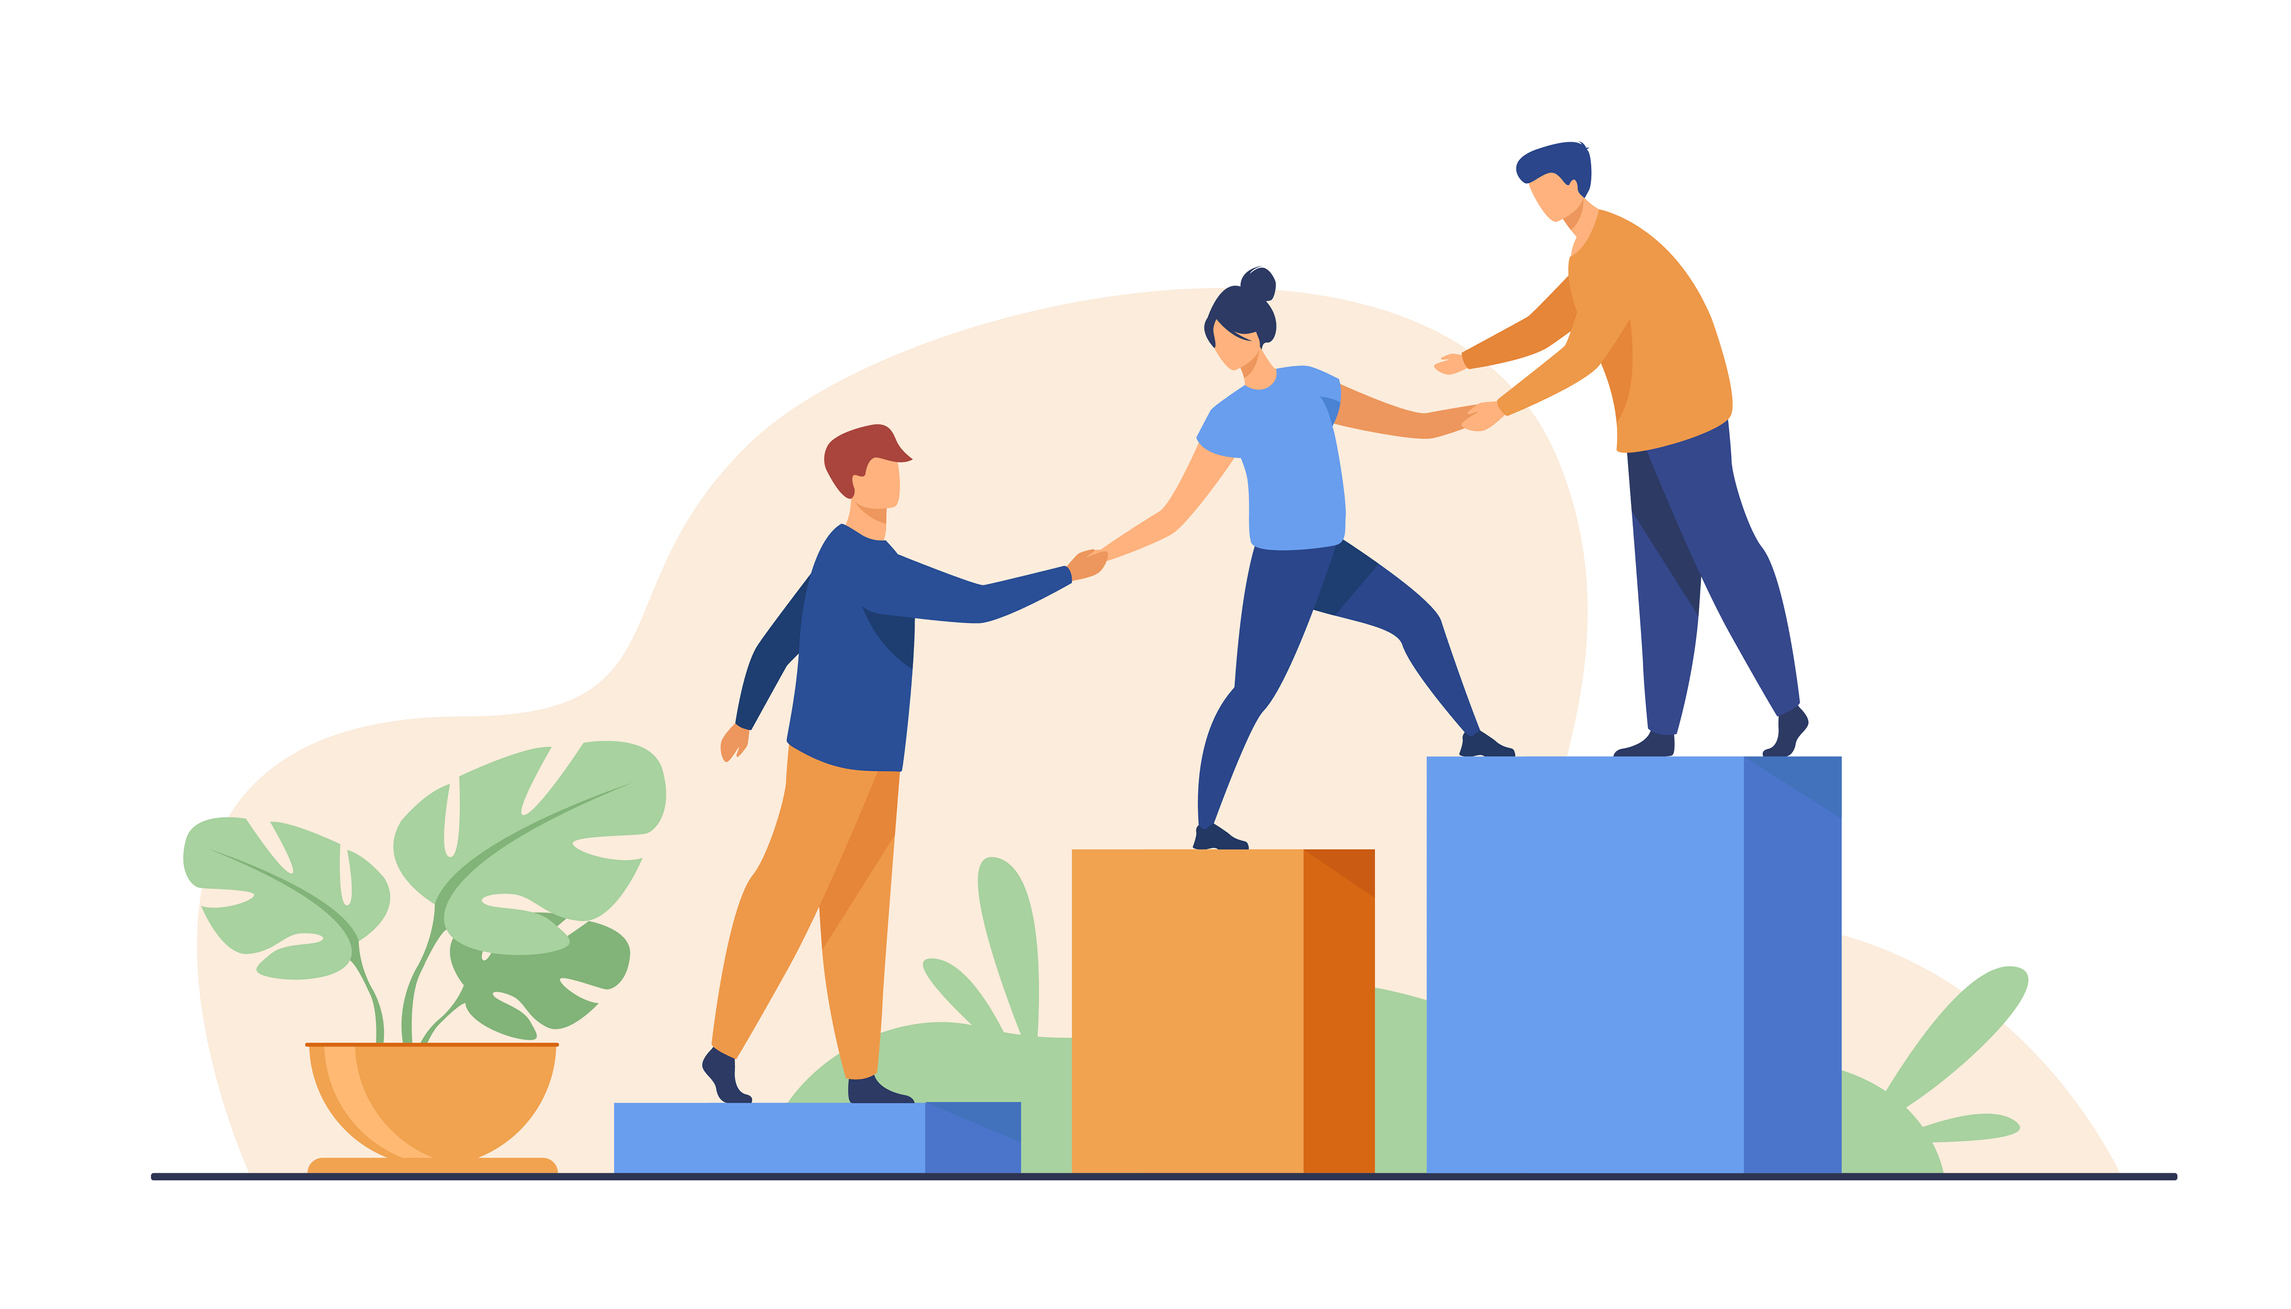 Corporate Giving - Illustration of humans helping each other to move upstairs